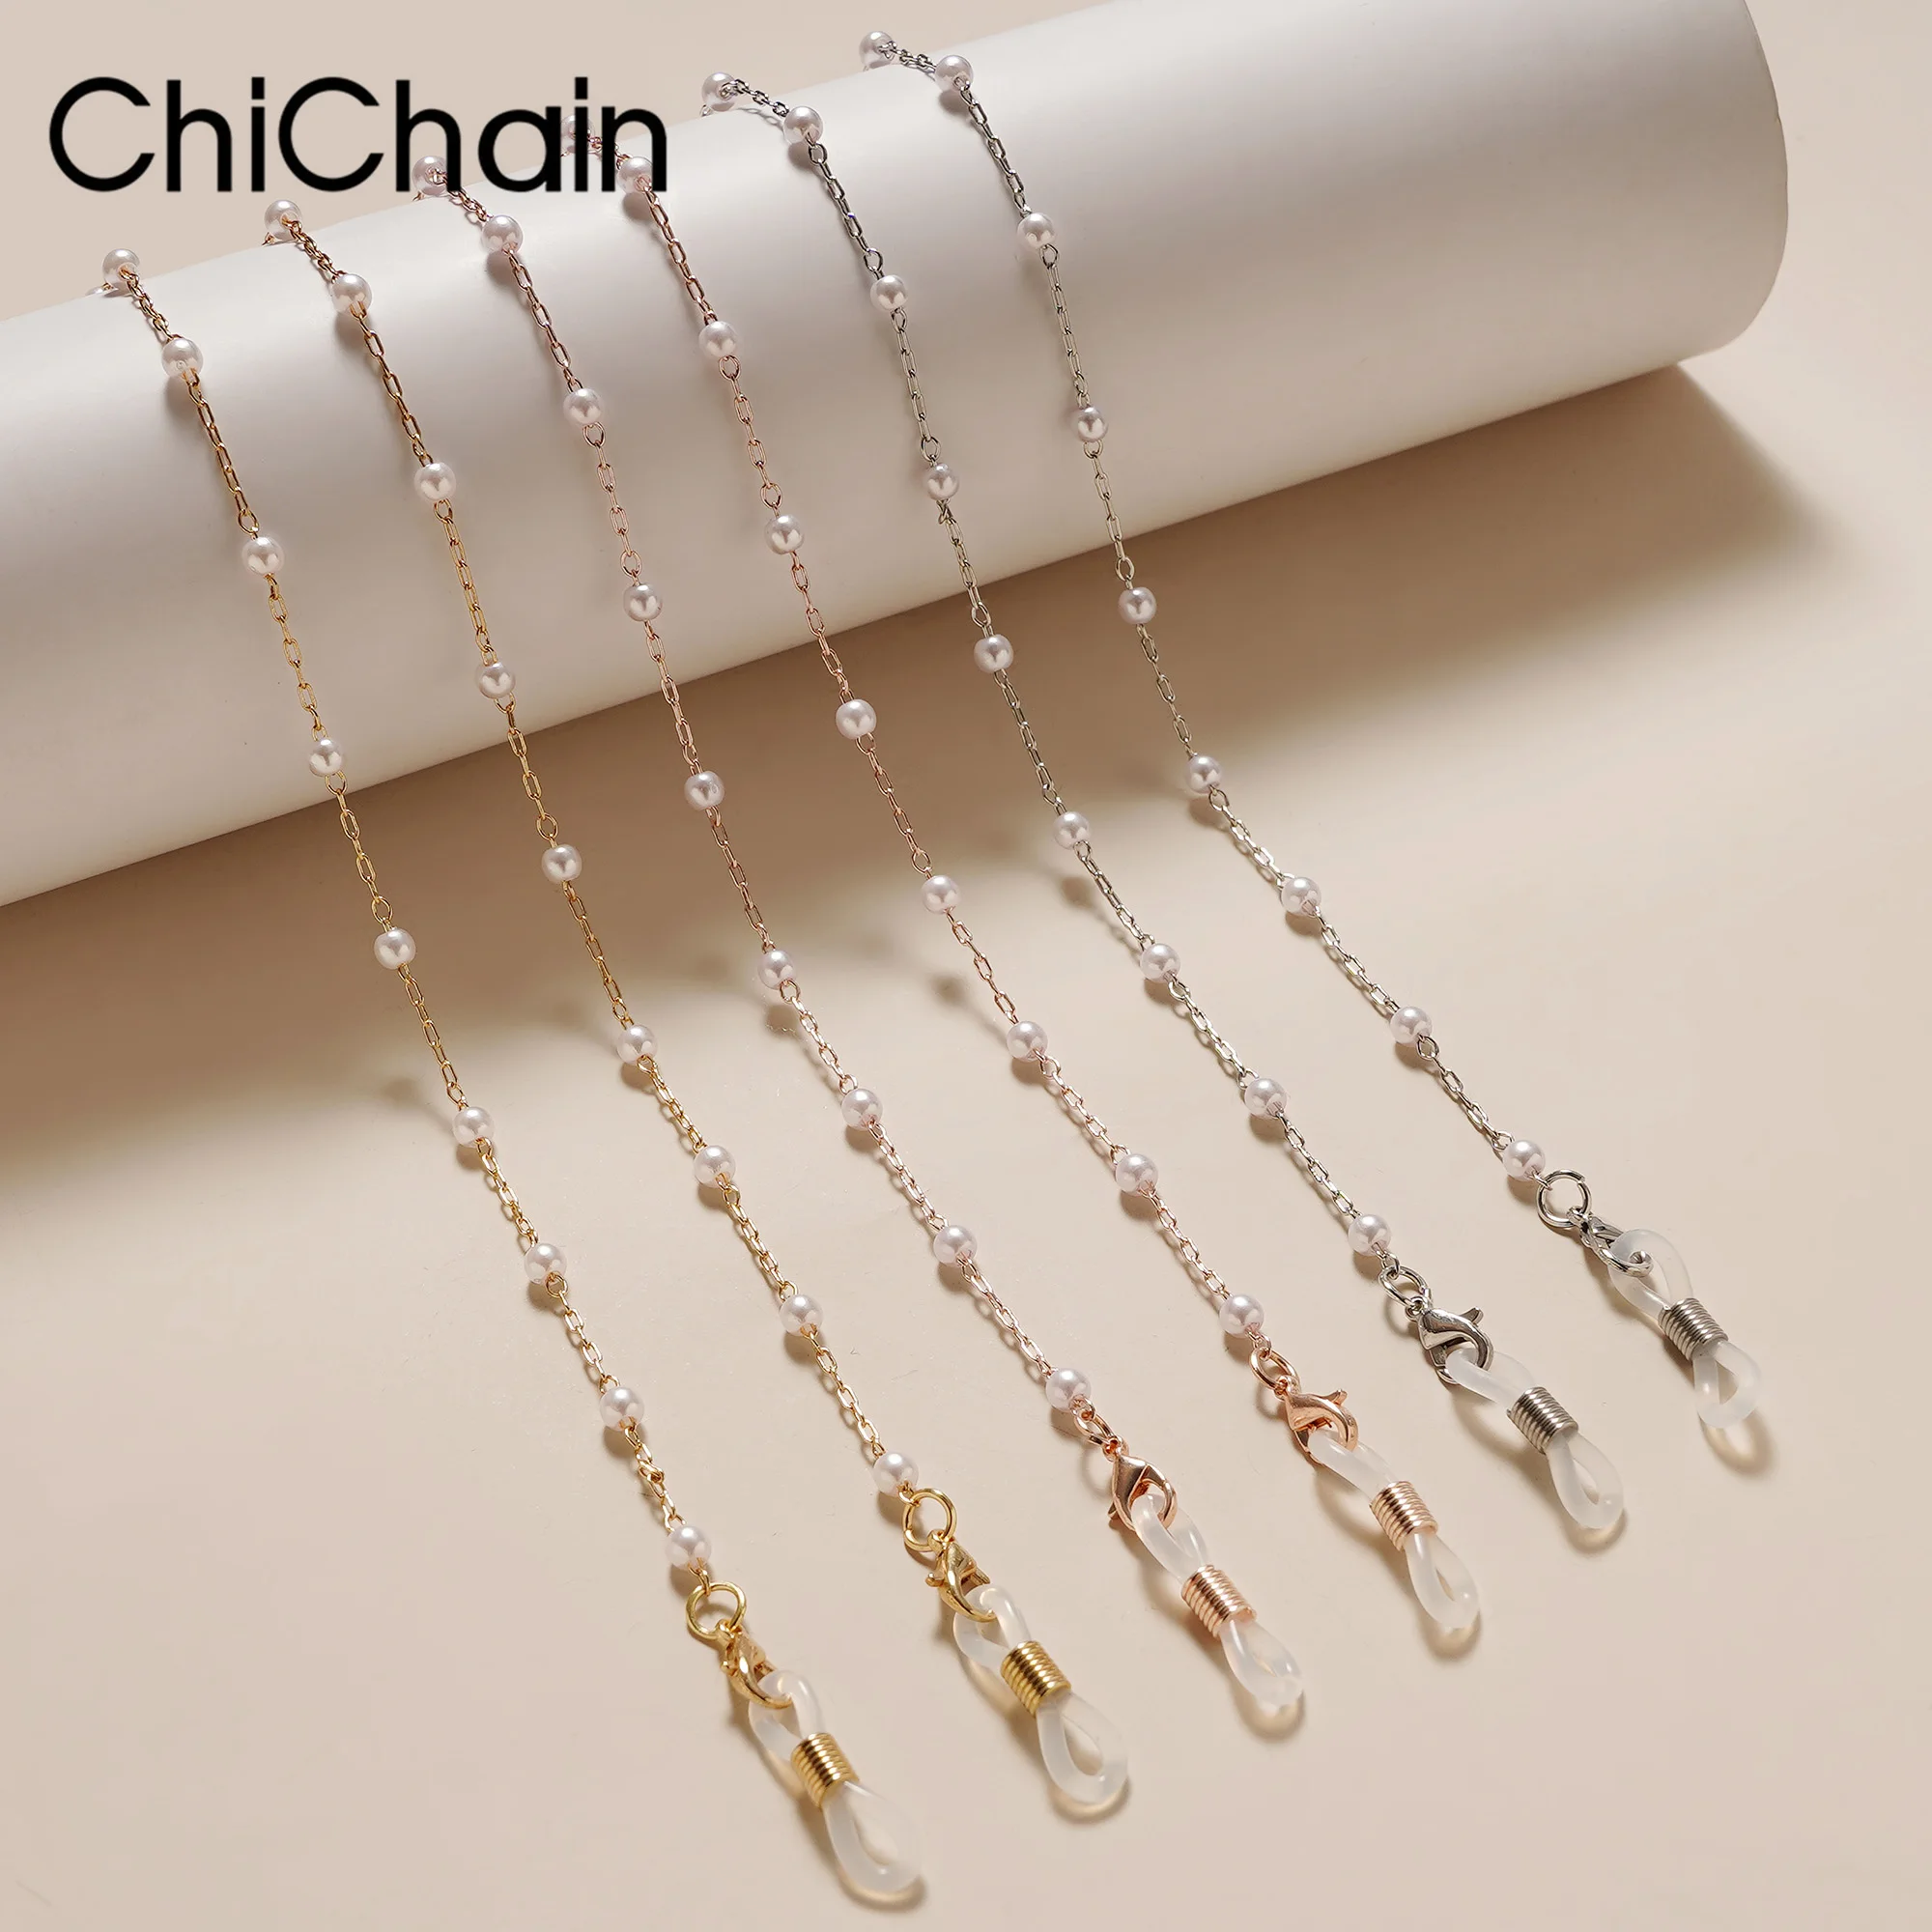 Fashion Pearl Mask Chains Glasses Chain For Women Retro Metal Sunglasses Lanyards Eyewear Cord Holder Neck Strap